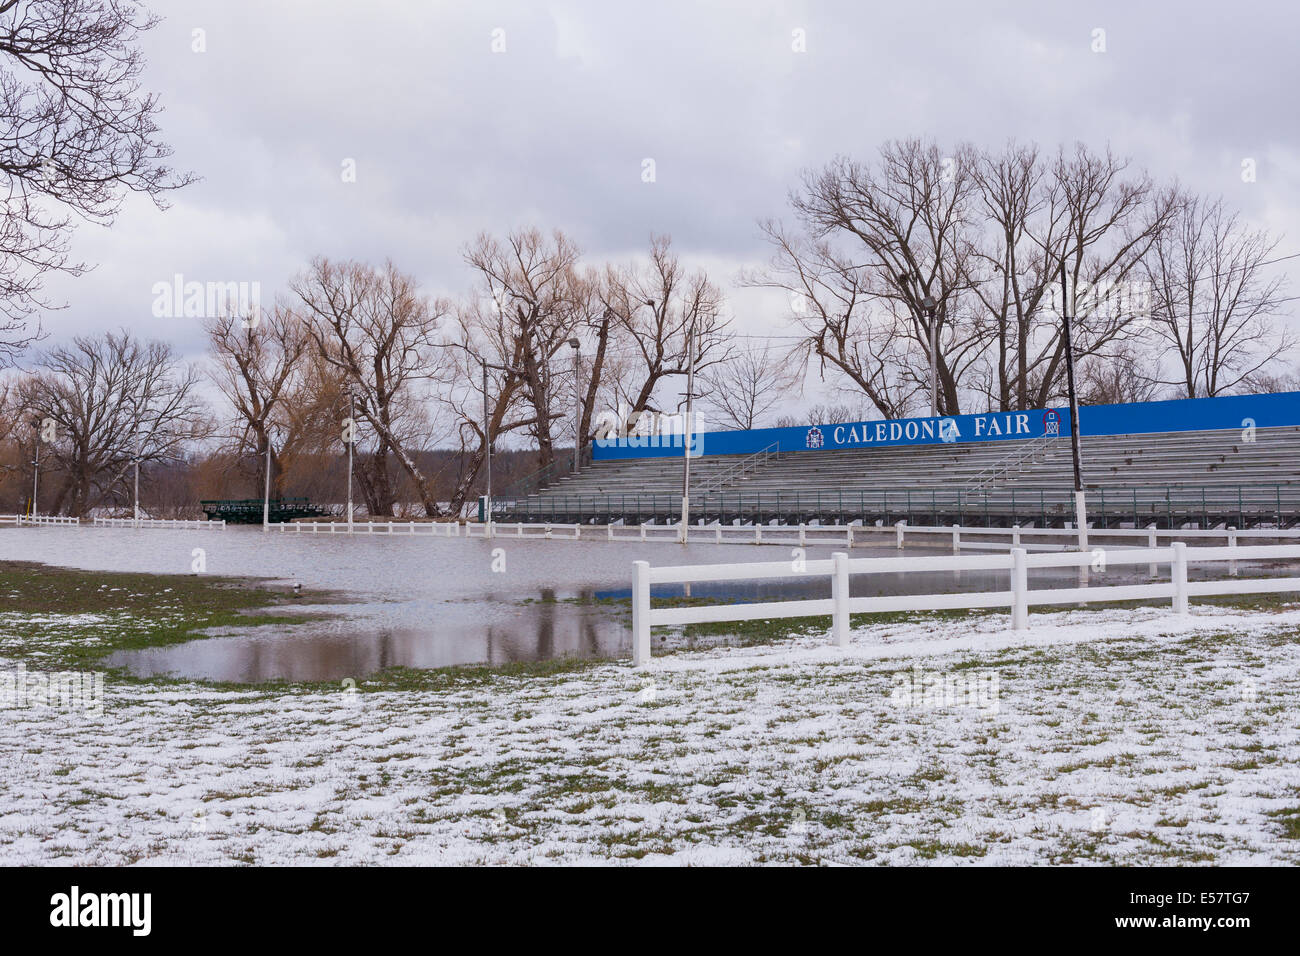 A field in the Caledonia Fairgrounds floods during a spring thaw. Caledonia, Ontario, Canada. Stock Photo